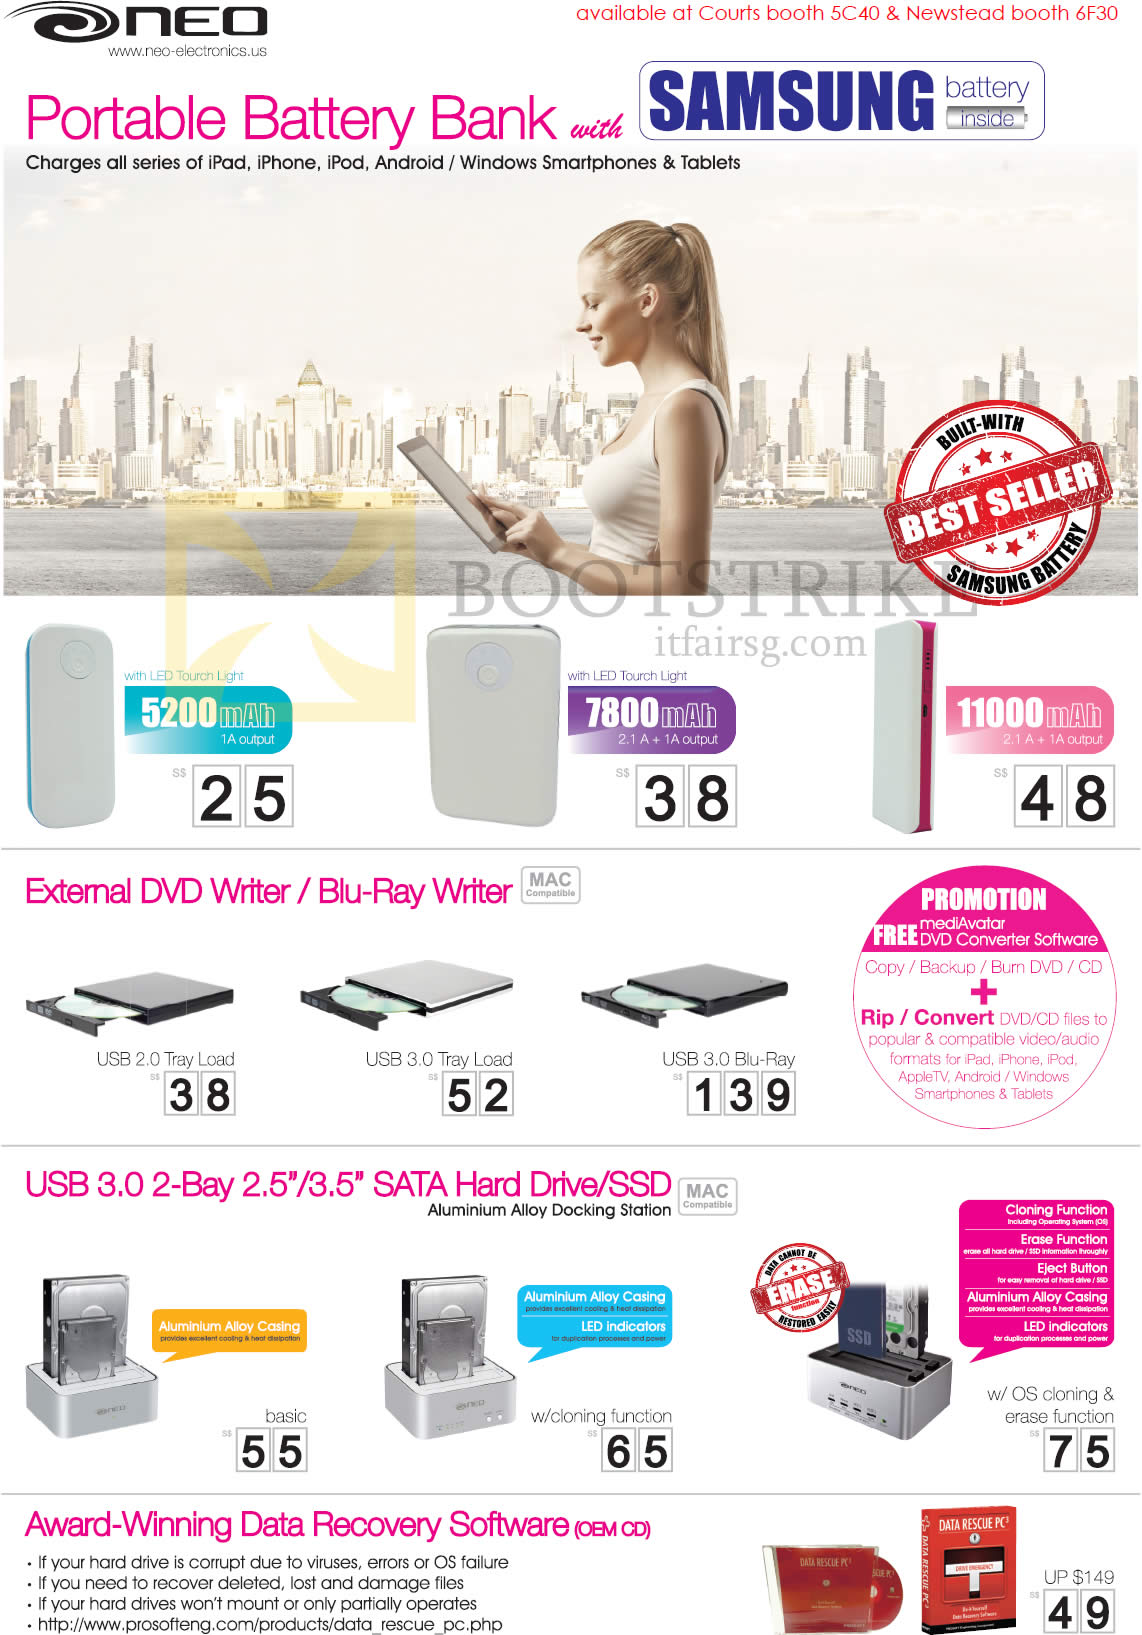 SITEX 2013 price list image brochure of Eternal Asia Neo Battery Banks Samsung Battery, External Optical Drive DVD Blu-Ray, USB Sata SSD Docking Station, Data Recovery Software